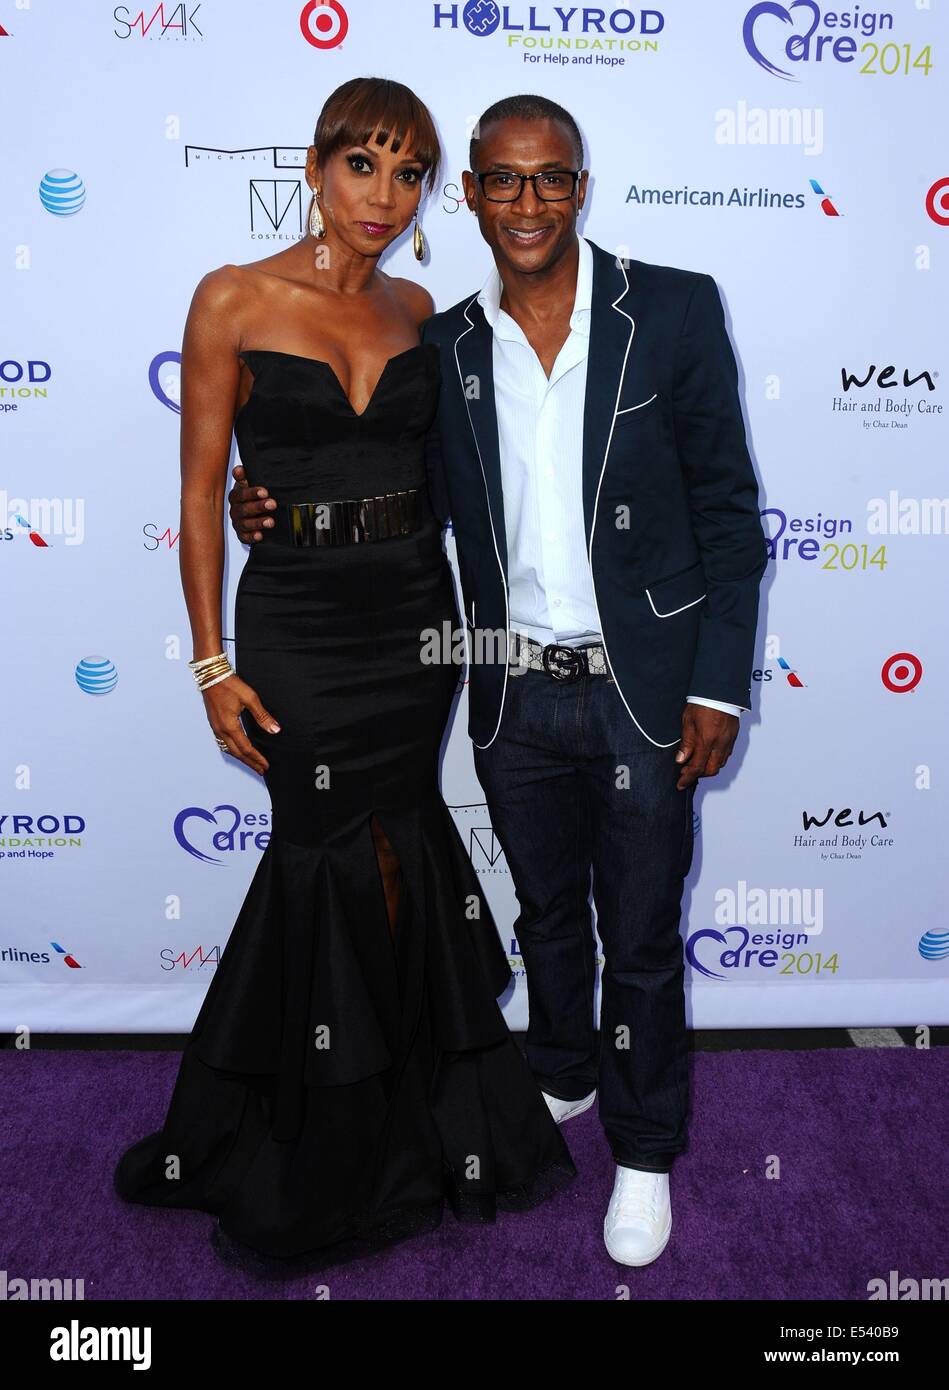 Los Angeles, CA, USA. 19th July, 2014. Holly Robinson Peete, Tommy Davidson at arrivals for 16th Annual DesignCare to Benefit the HollyRod Foundation, The Lot Studios in West Hollywood, Los Angeles, CA July 19, 2014. Credit:  Dee Cercone/Everett Collection/Alamy Live News Stock Photo